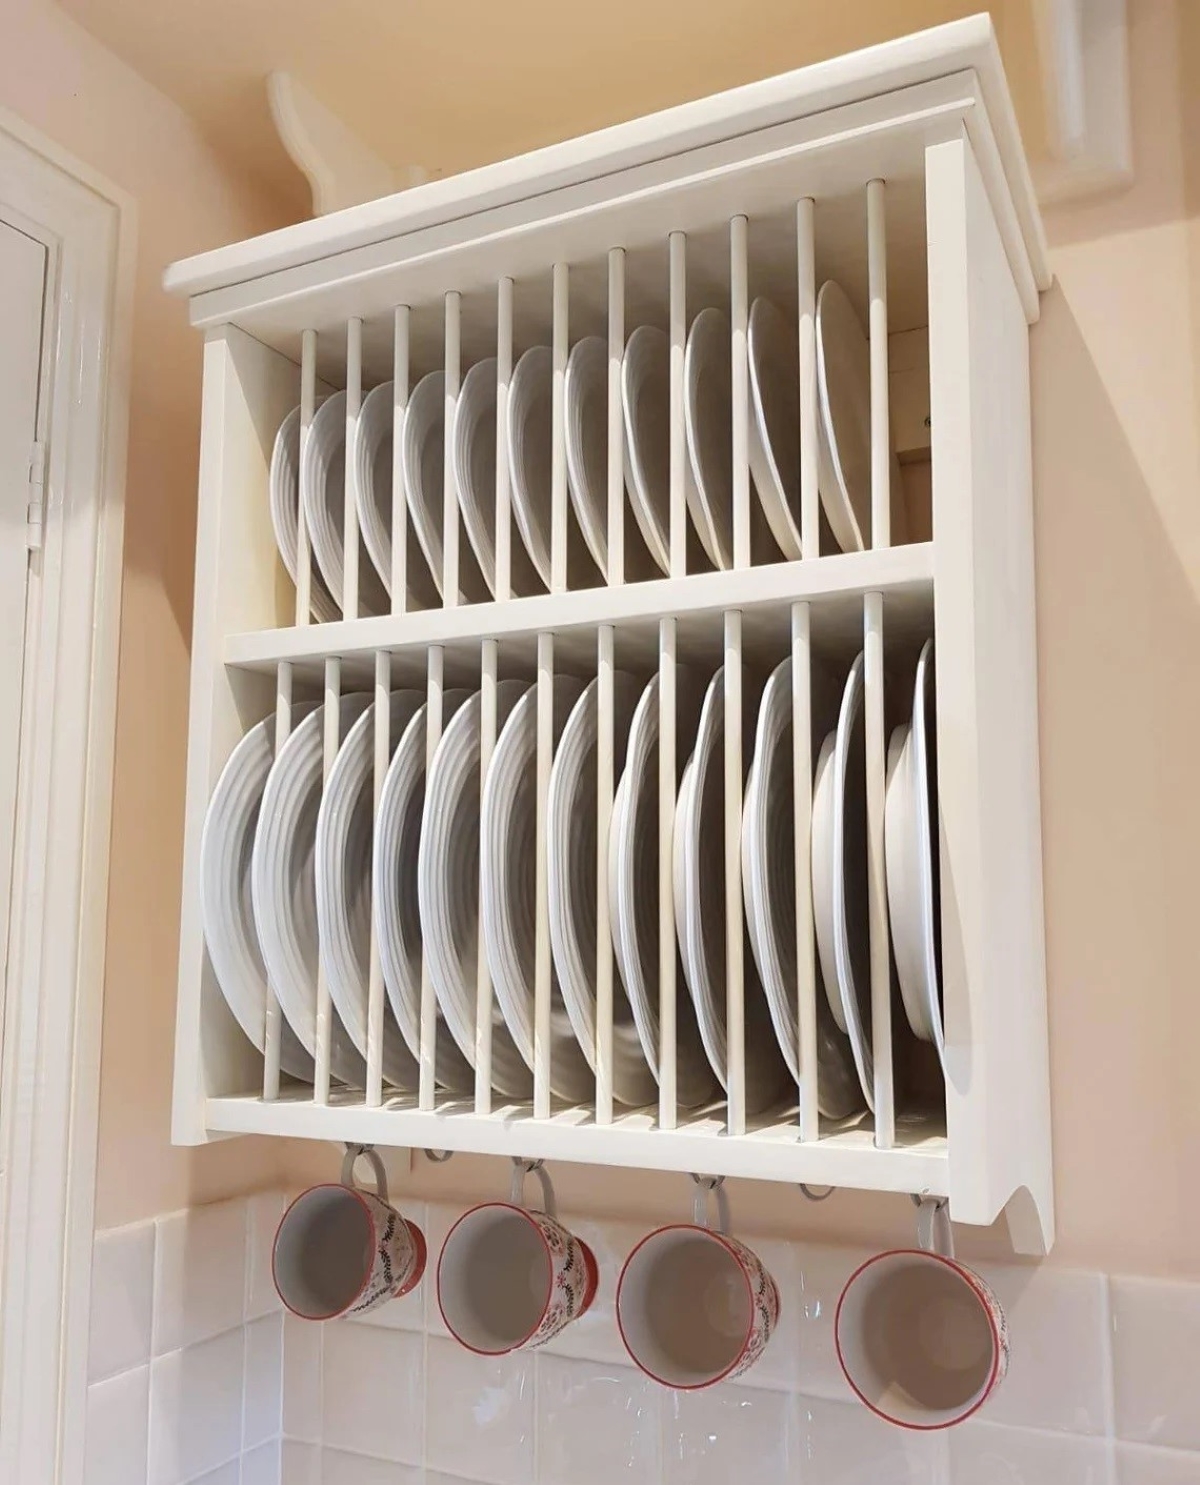 White plate rack with dishes and cups hanging below